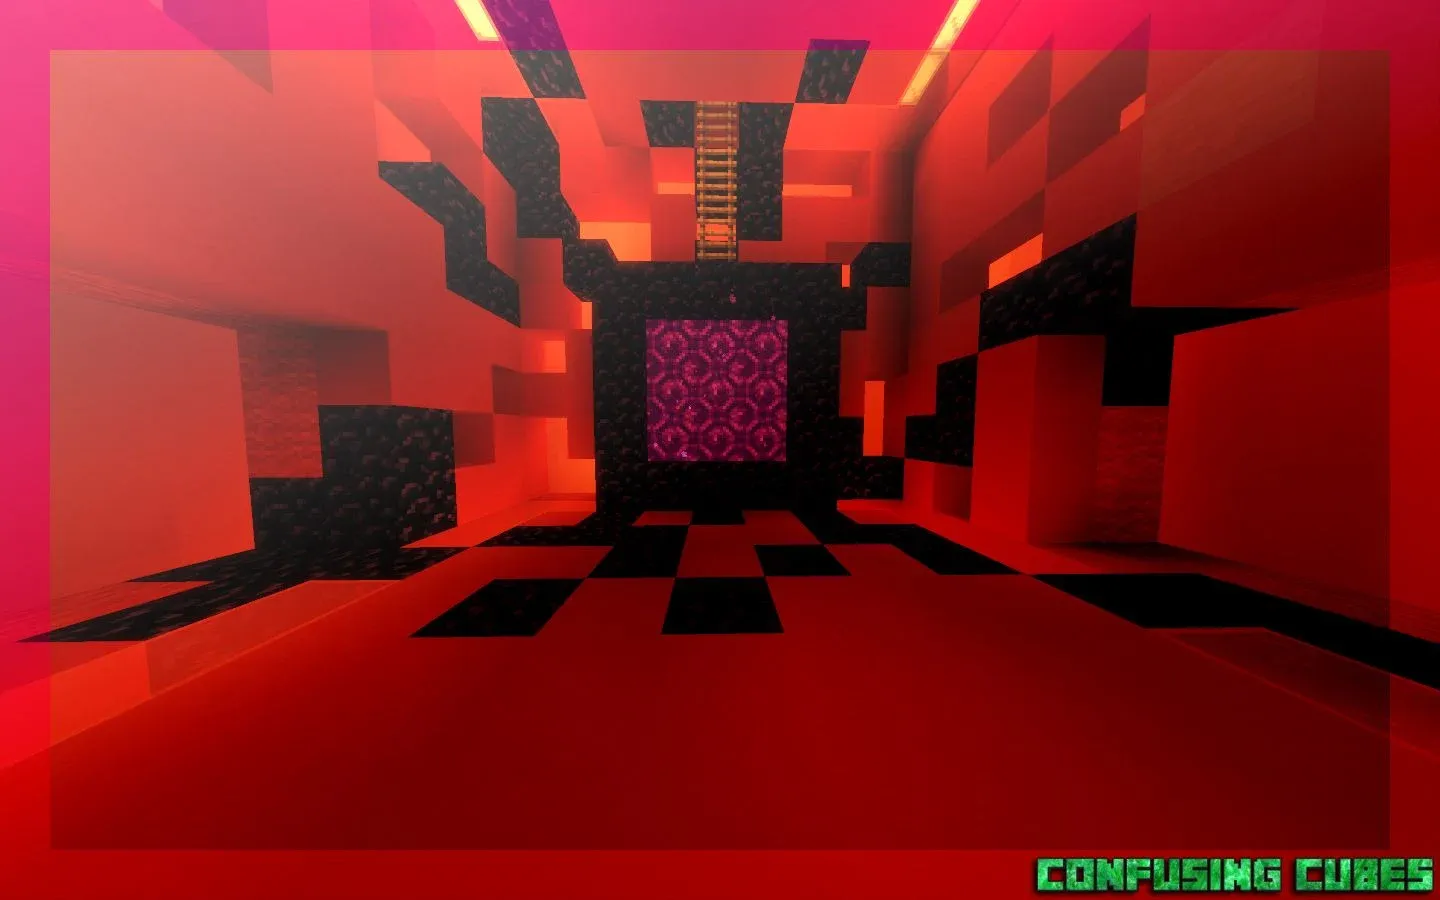 A screenshot from one of the map levels. A nether portal inside of a red cube.